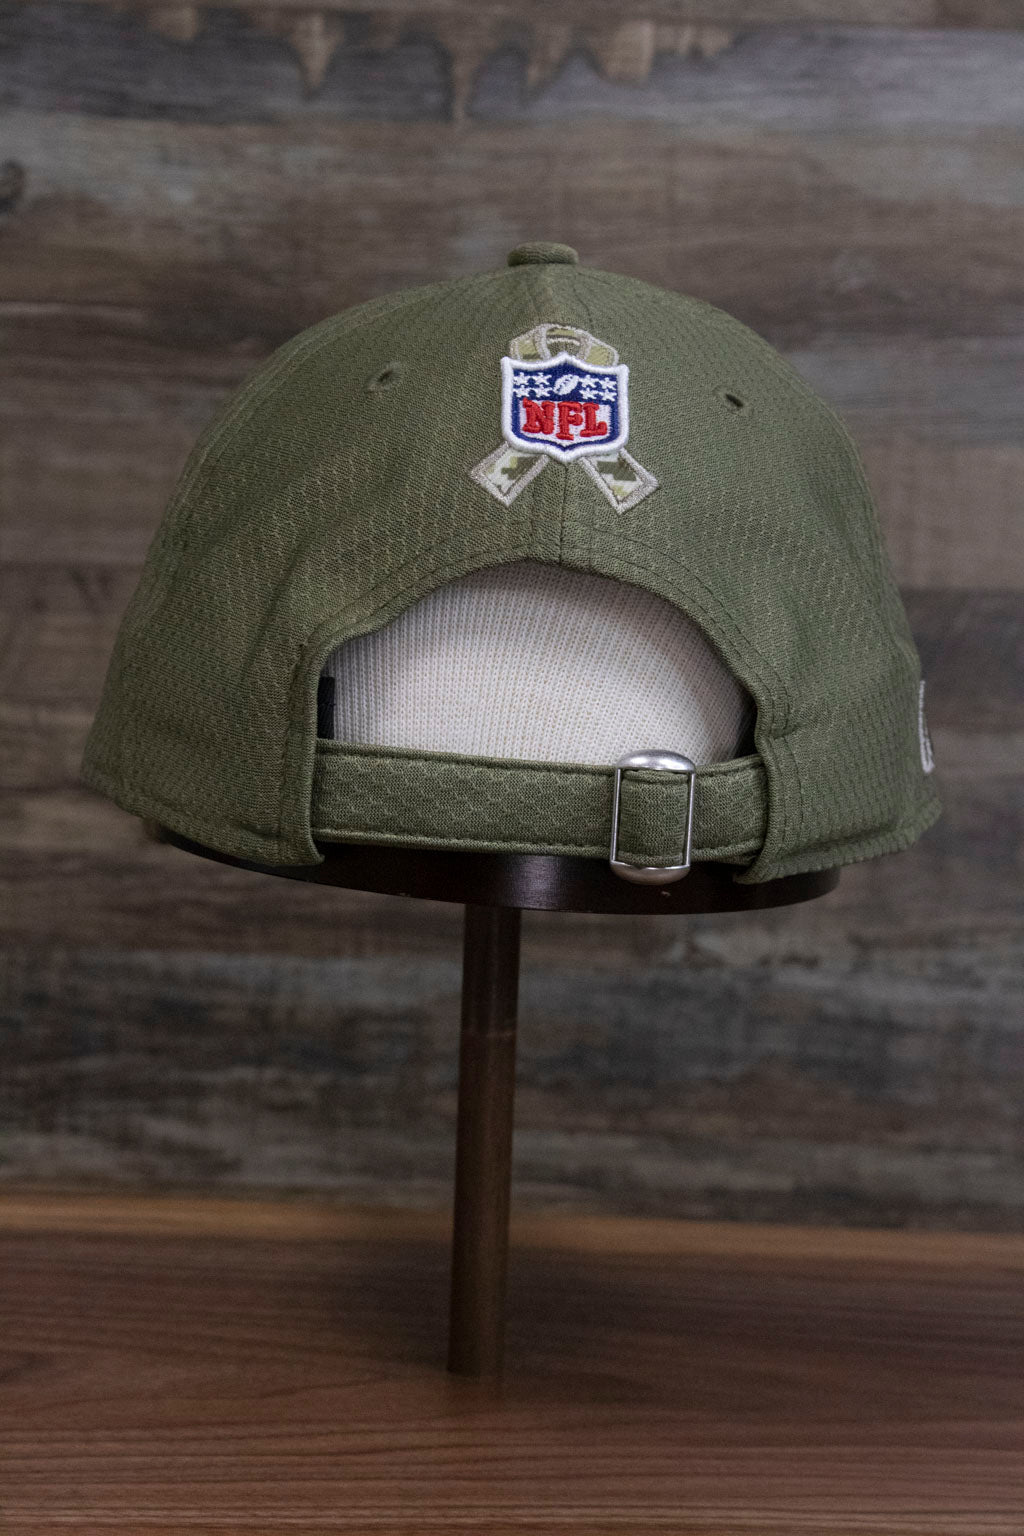 the back of the Pittsburgh Steelers 2019 Salute To Service Dad Hat | Steelers On Field Olive Green Military Inspired Baseball Cap has a large NFL shield and ribbon, plus an adjustable strap